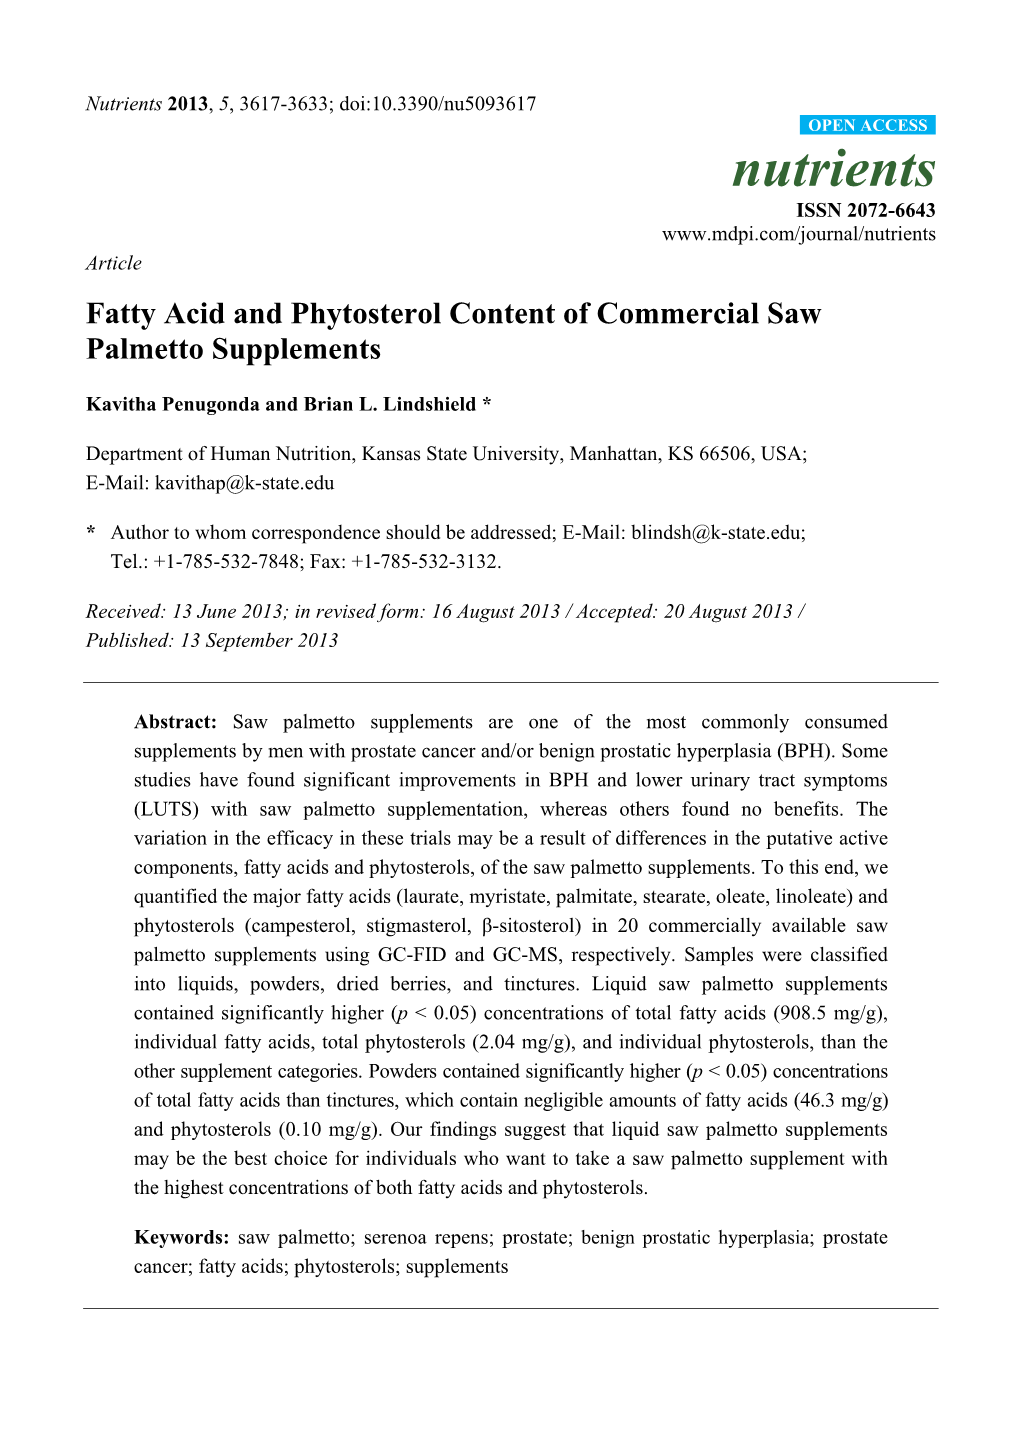 Fatty Acid and Phytosterol Content of Commercial Saw Palmetto Supplements